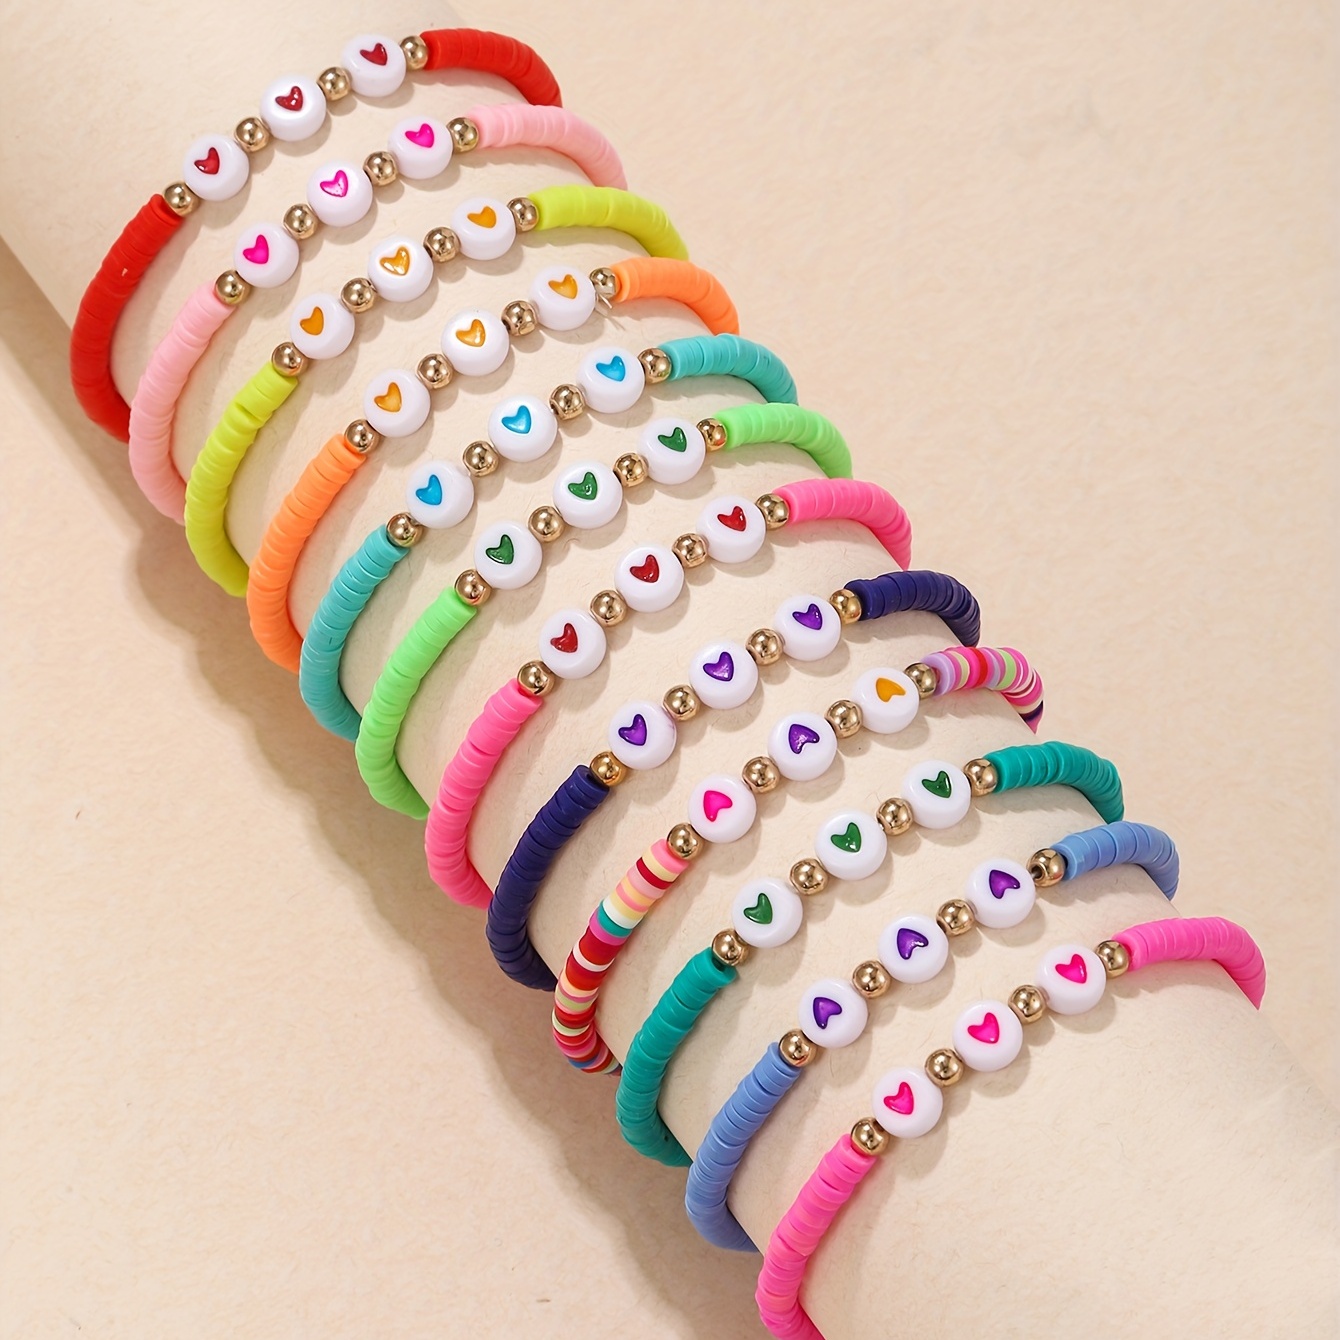 11pcs Letter Patter Beads Beaded Bracelet Set With Colorful Clay Beads  Stackable Friendship Bracelet